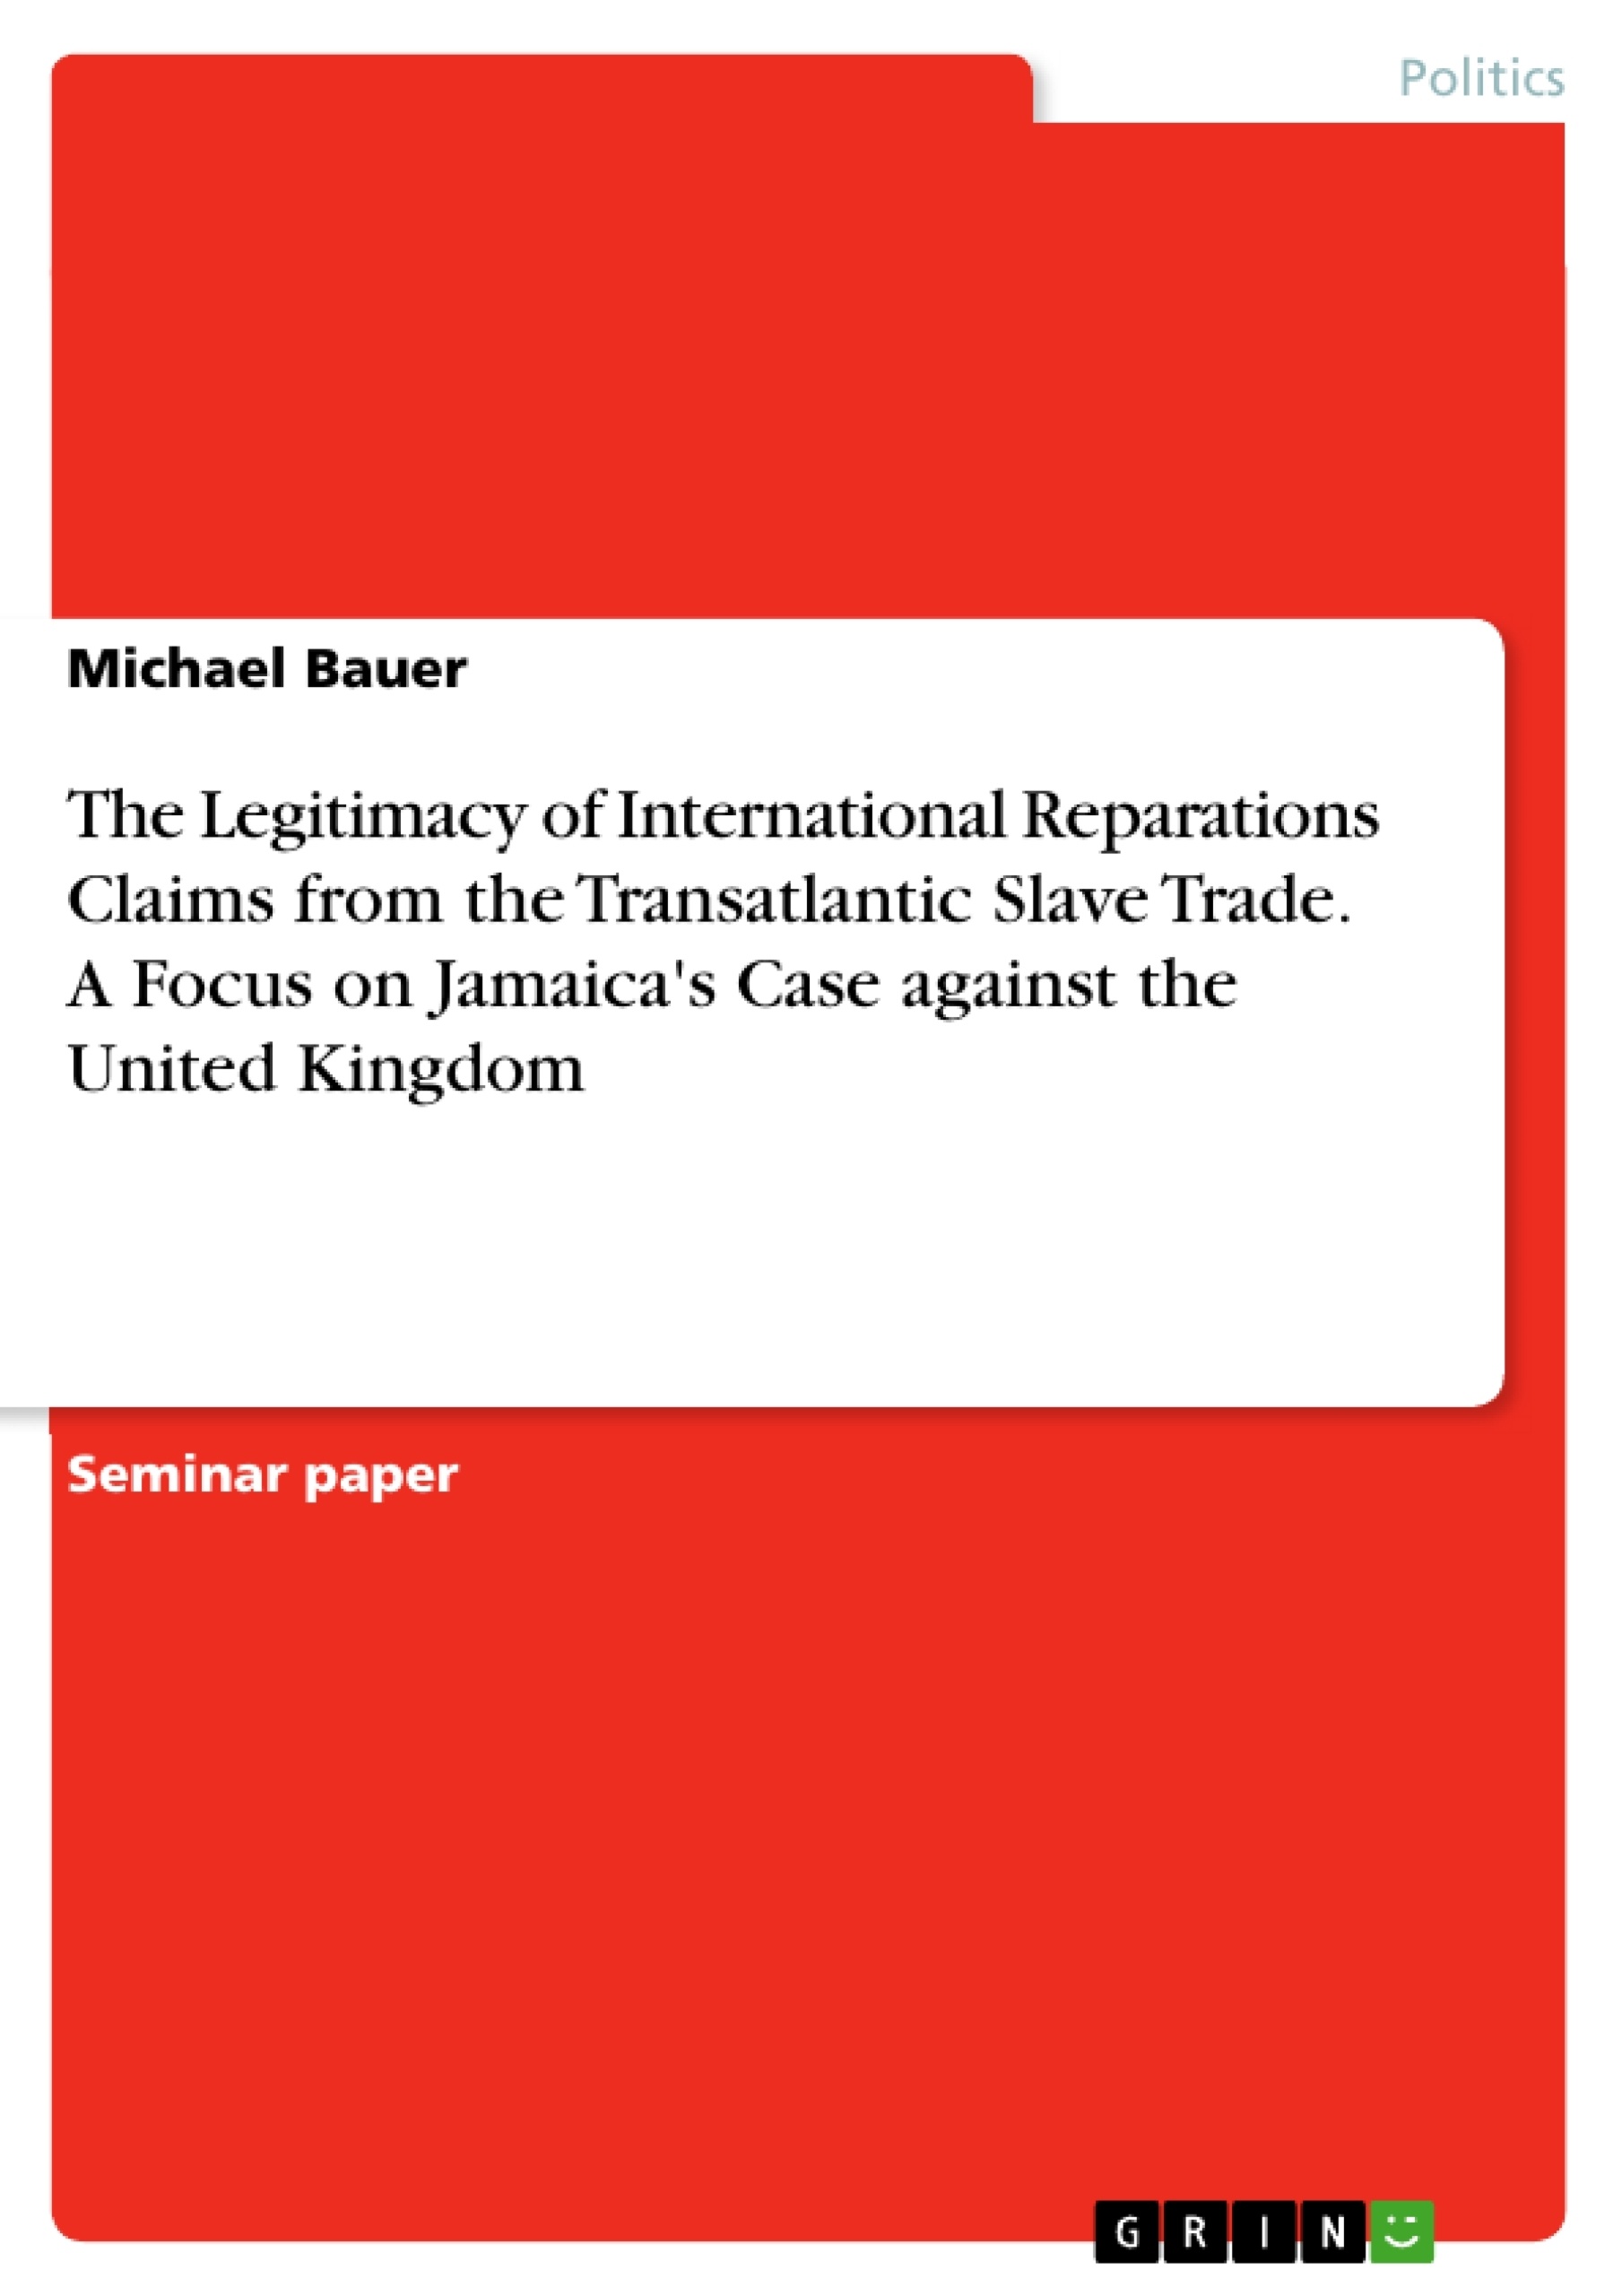 Title: The Legitimacy of International Reparations Claims from the Transatlantic Slave Trade. A Focus on Jamaica's Case against the United Kingdom